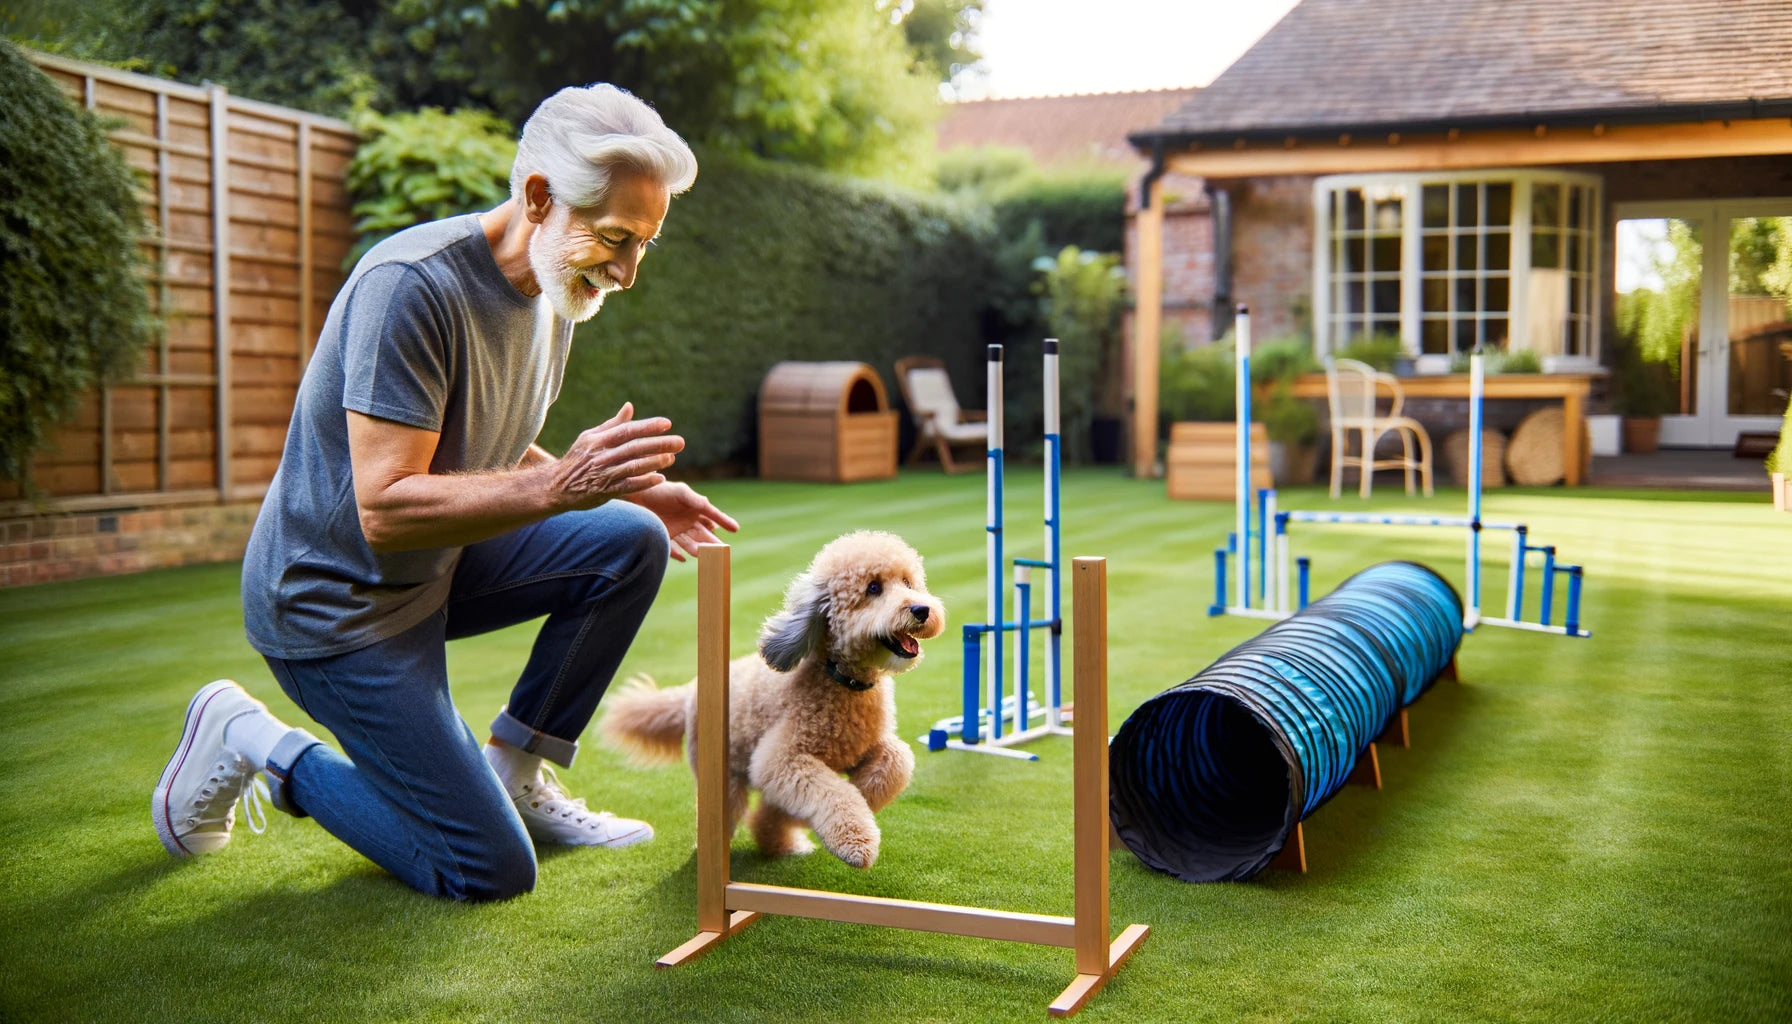 Baby Boomer and a Mini Goldendoodle engaged in a fun bonding training session in a backyard with agility equipment like tunnels and weave poles.